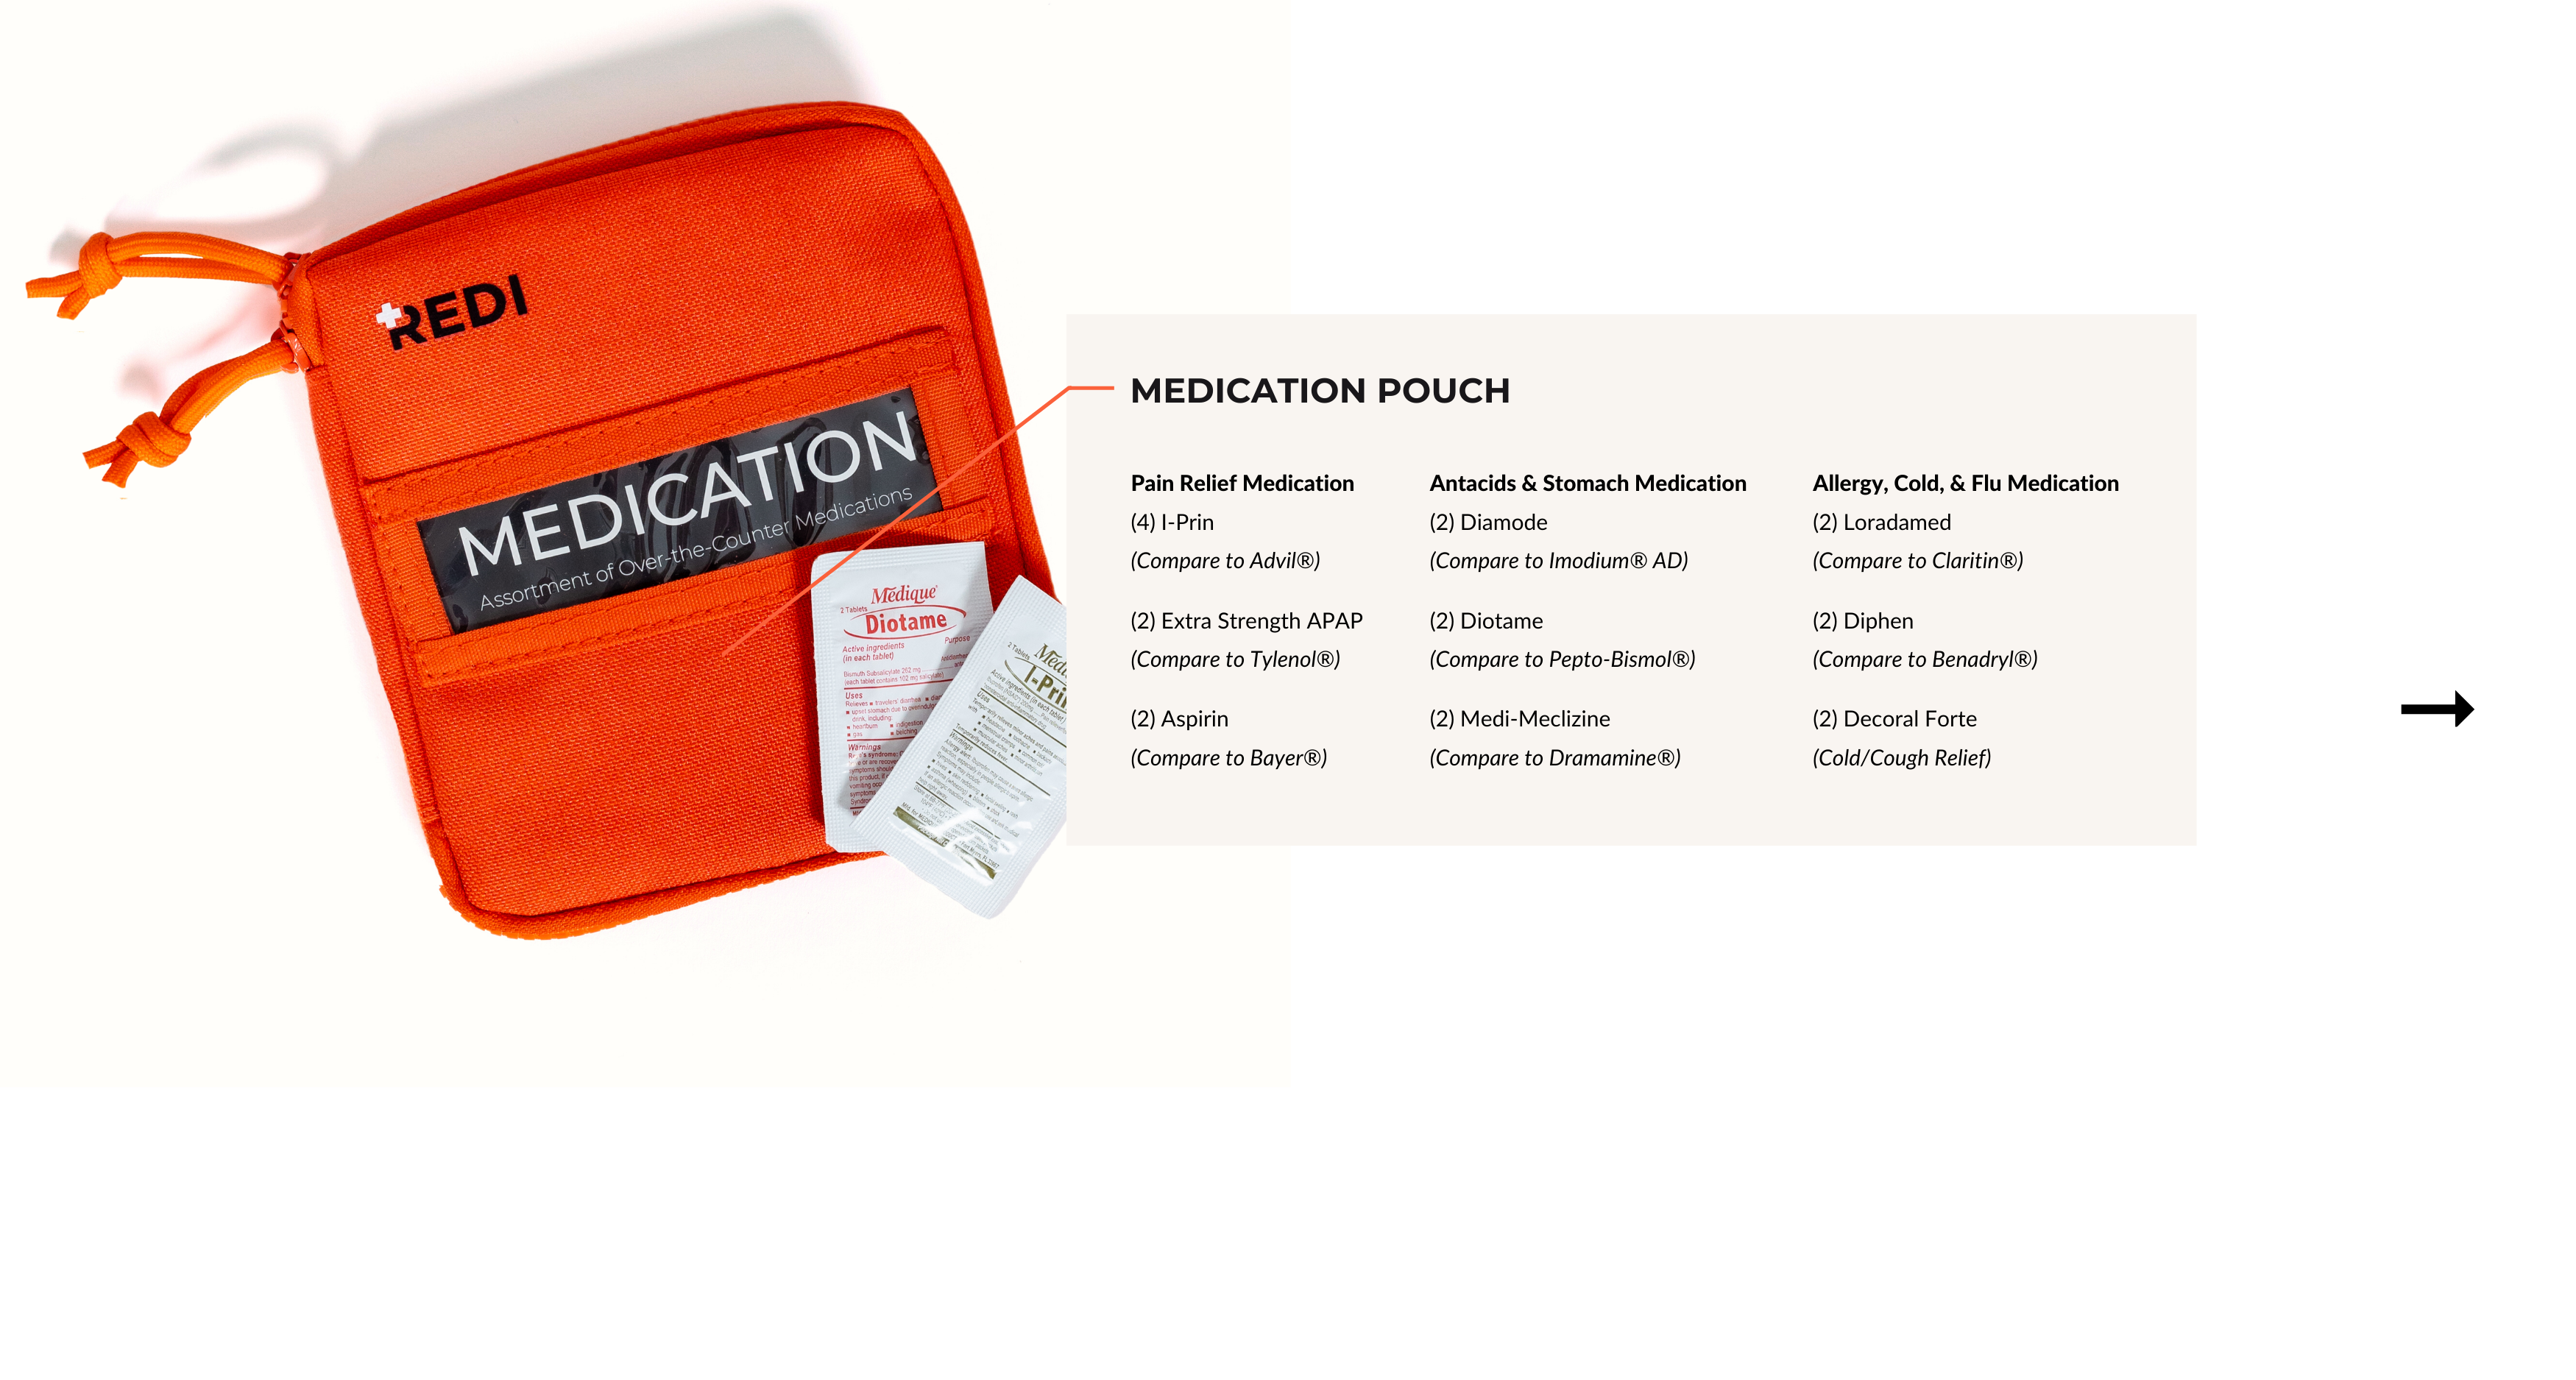 List of over the counter medications found in the removable medication pouch the comes with the Roadie, car first aid kit. 